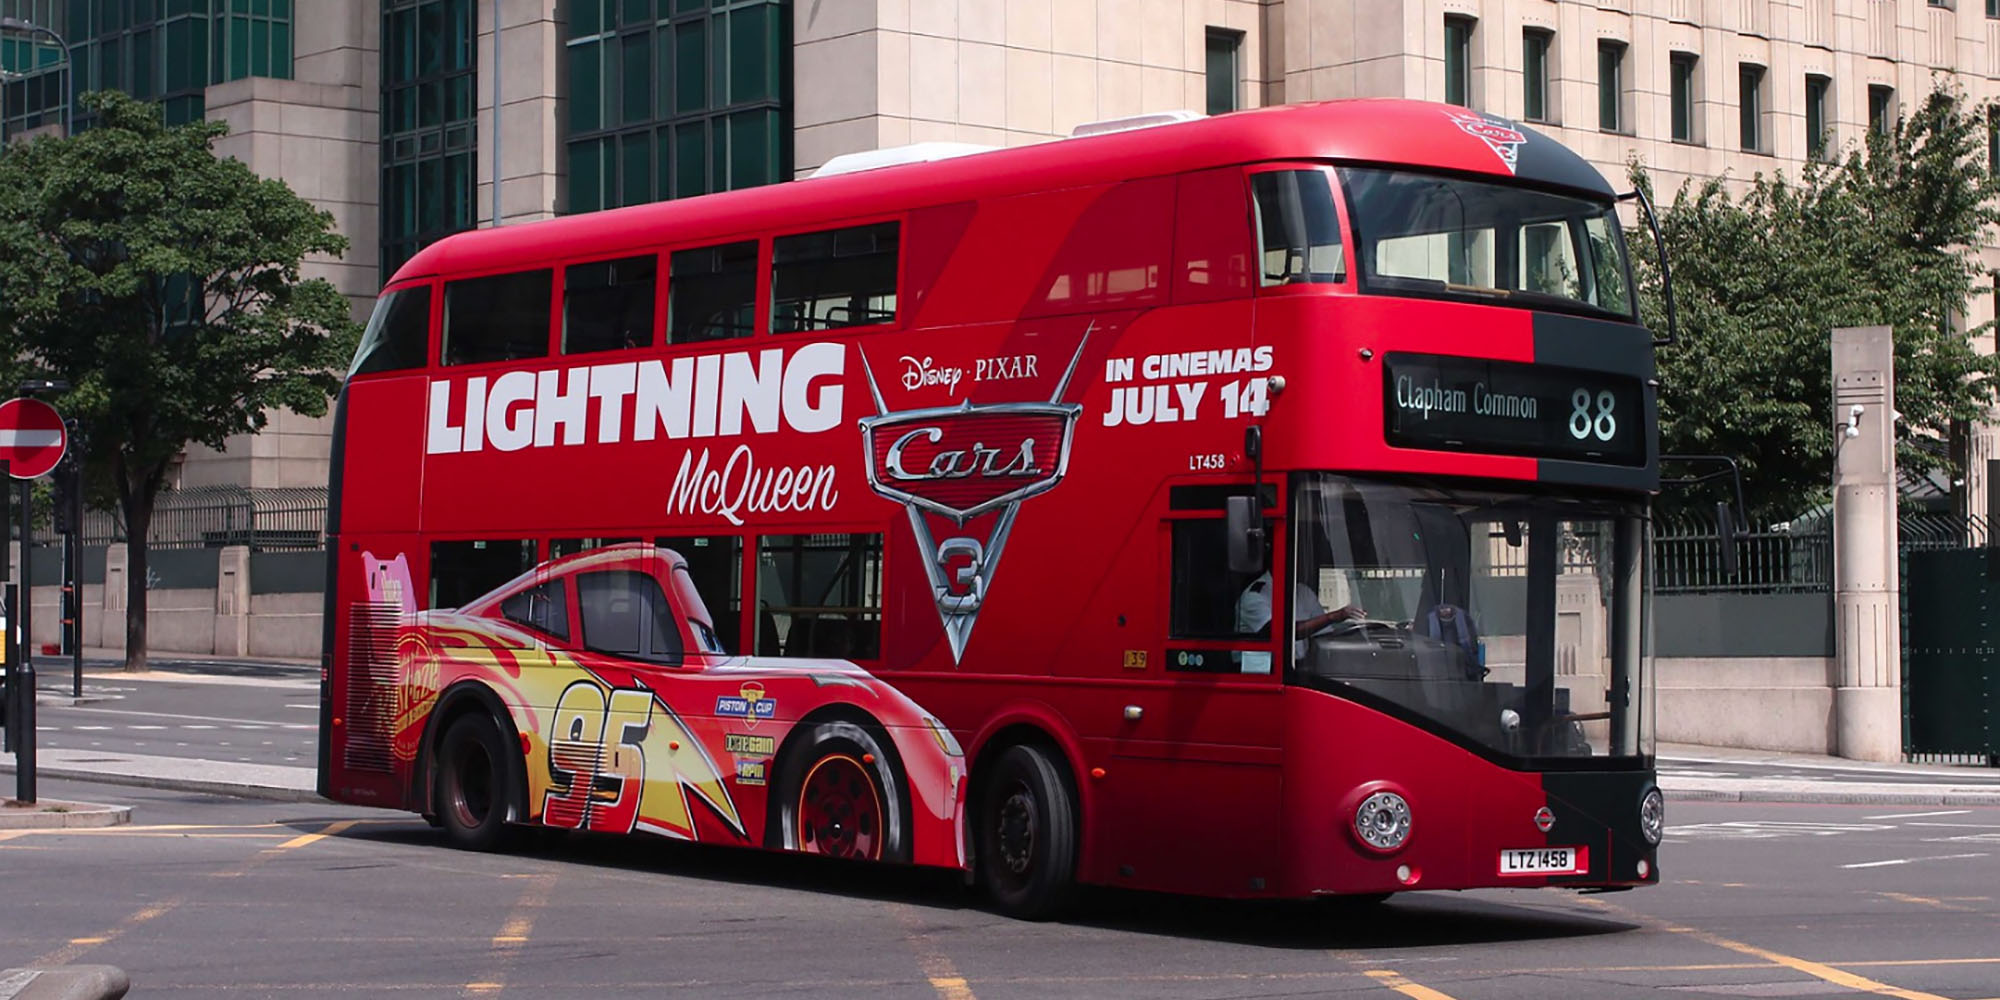 Full wrap bus advertising cars the Movie